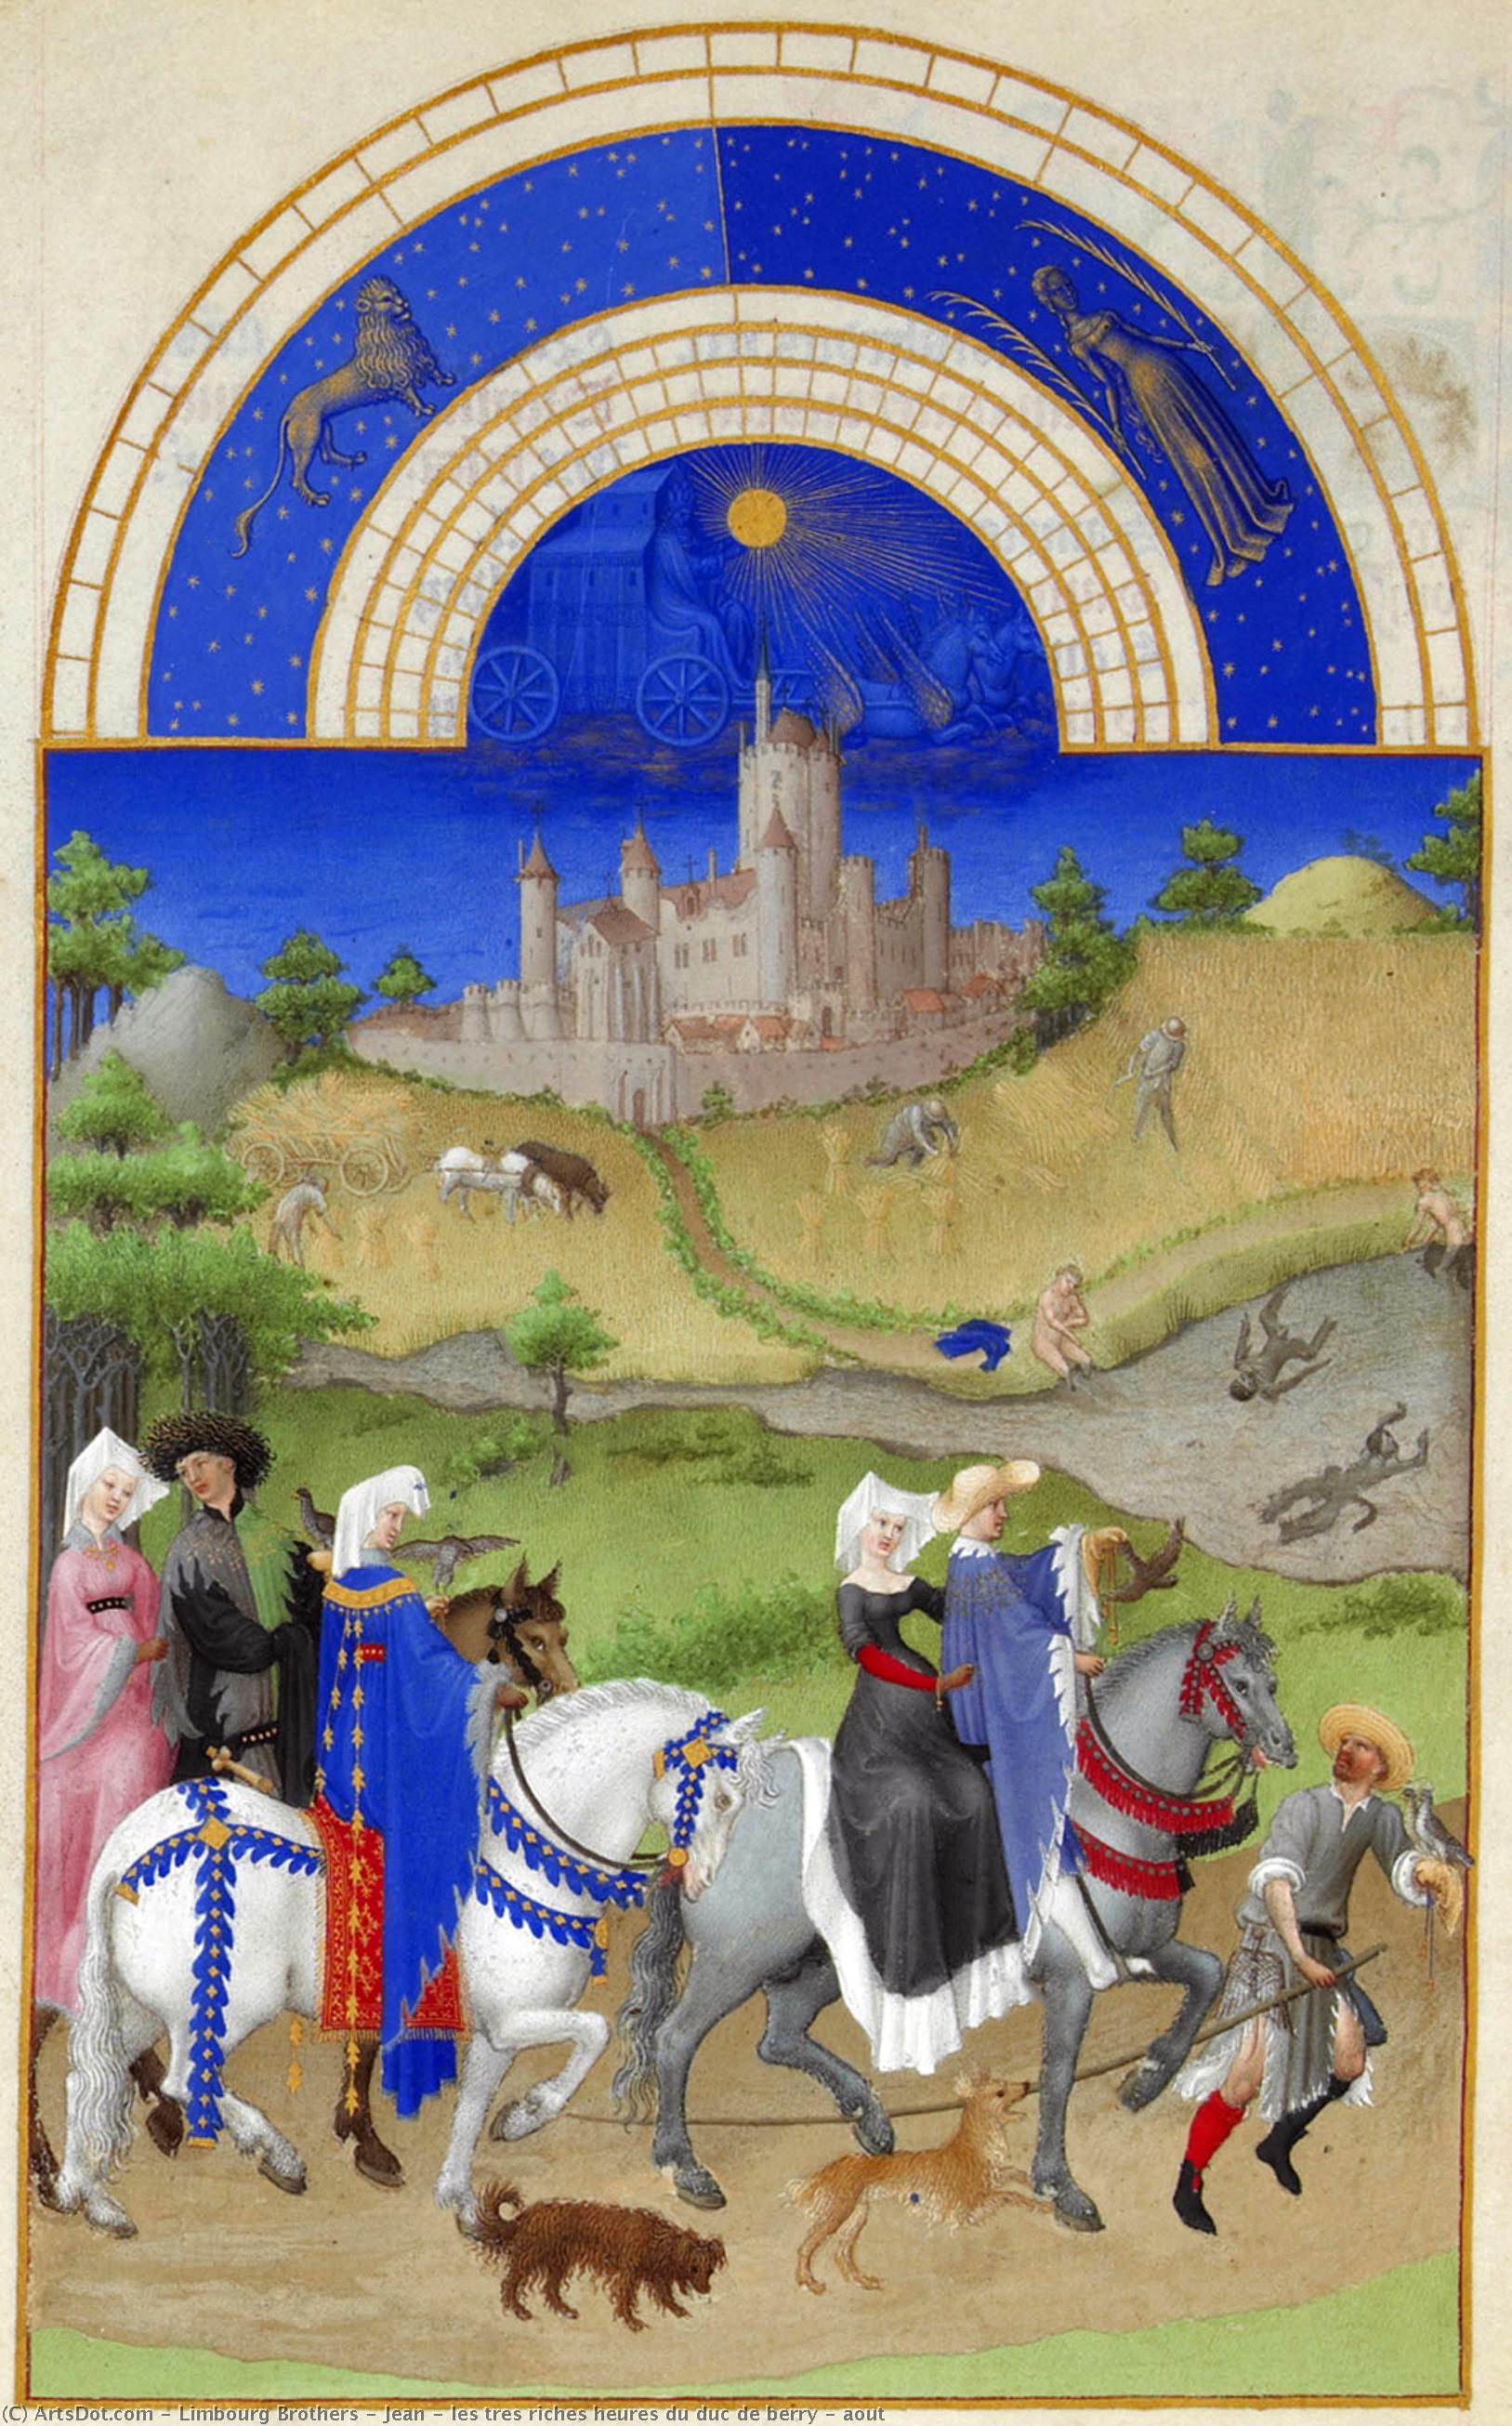 WikiOO.org - Encyclopedia of Fine Arts - Maalaus, taideteos Limbourg Brothers - Jean - les tres riches heures du duc de berry - aout